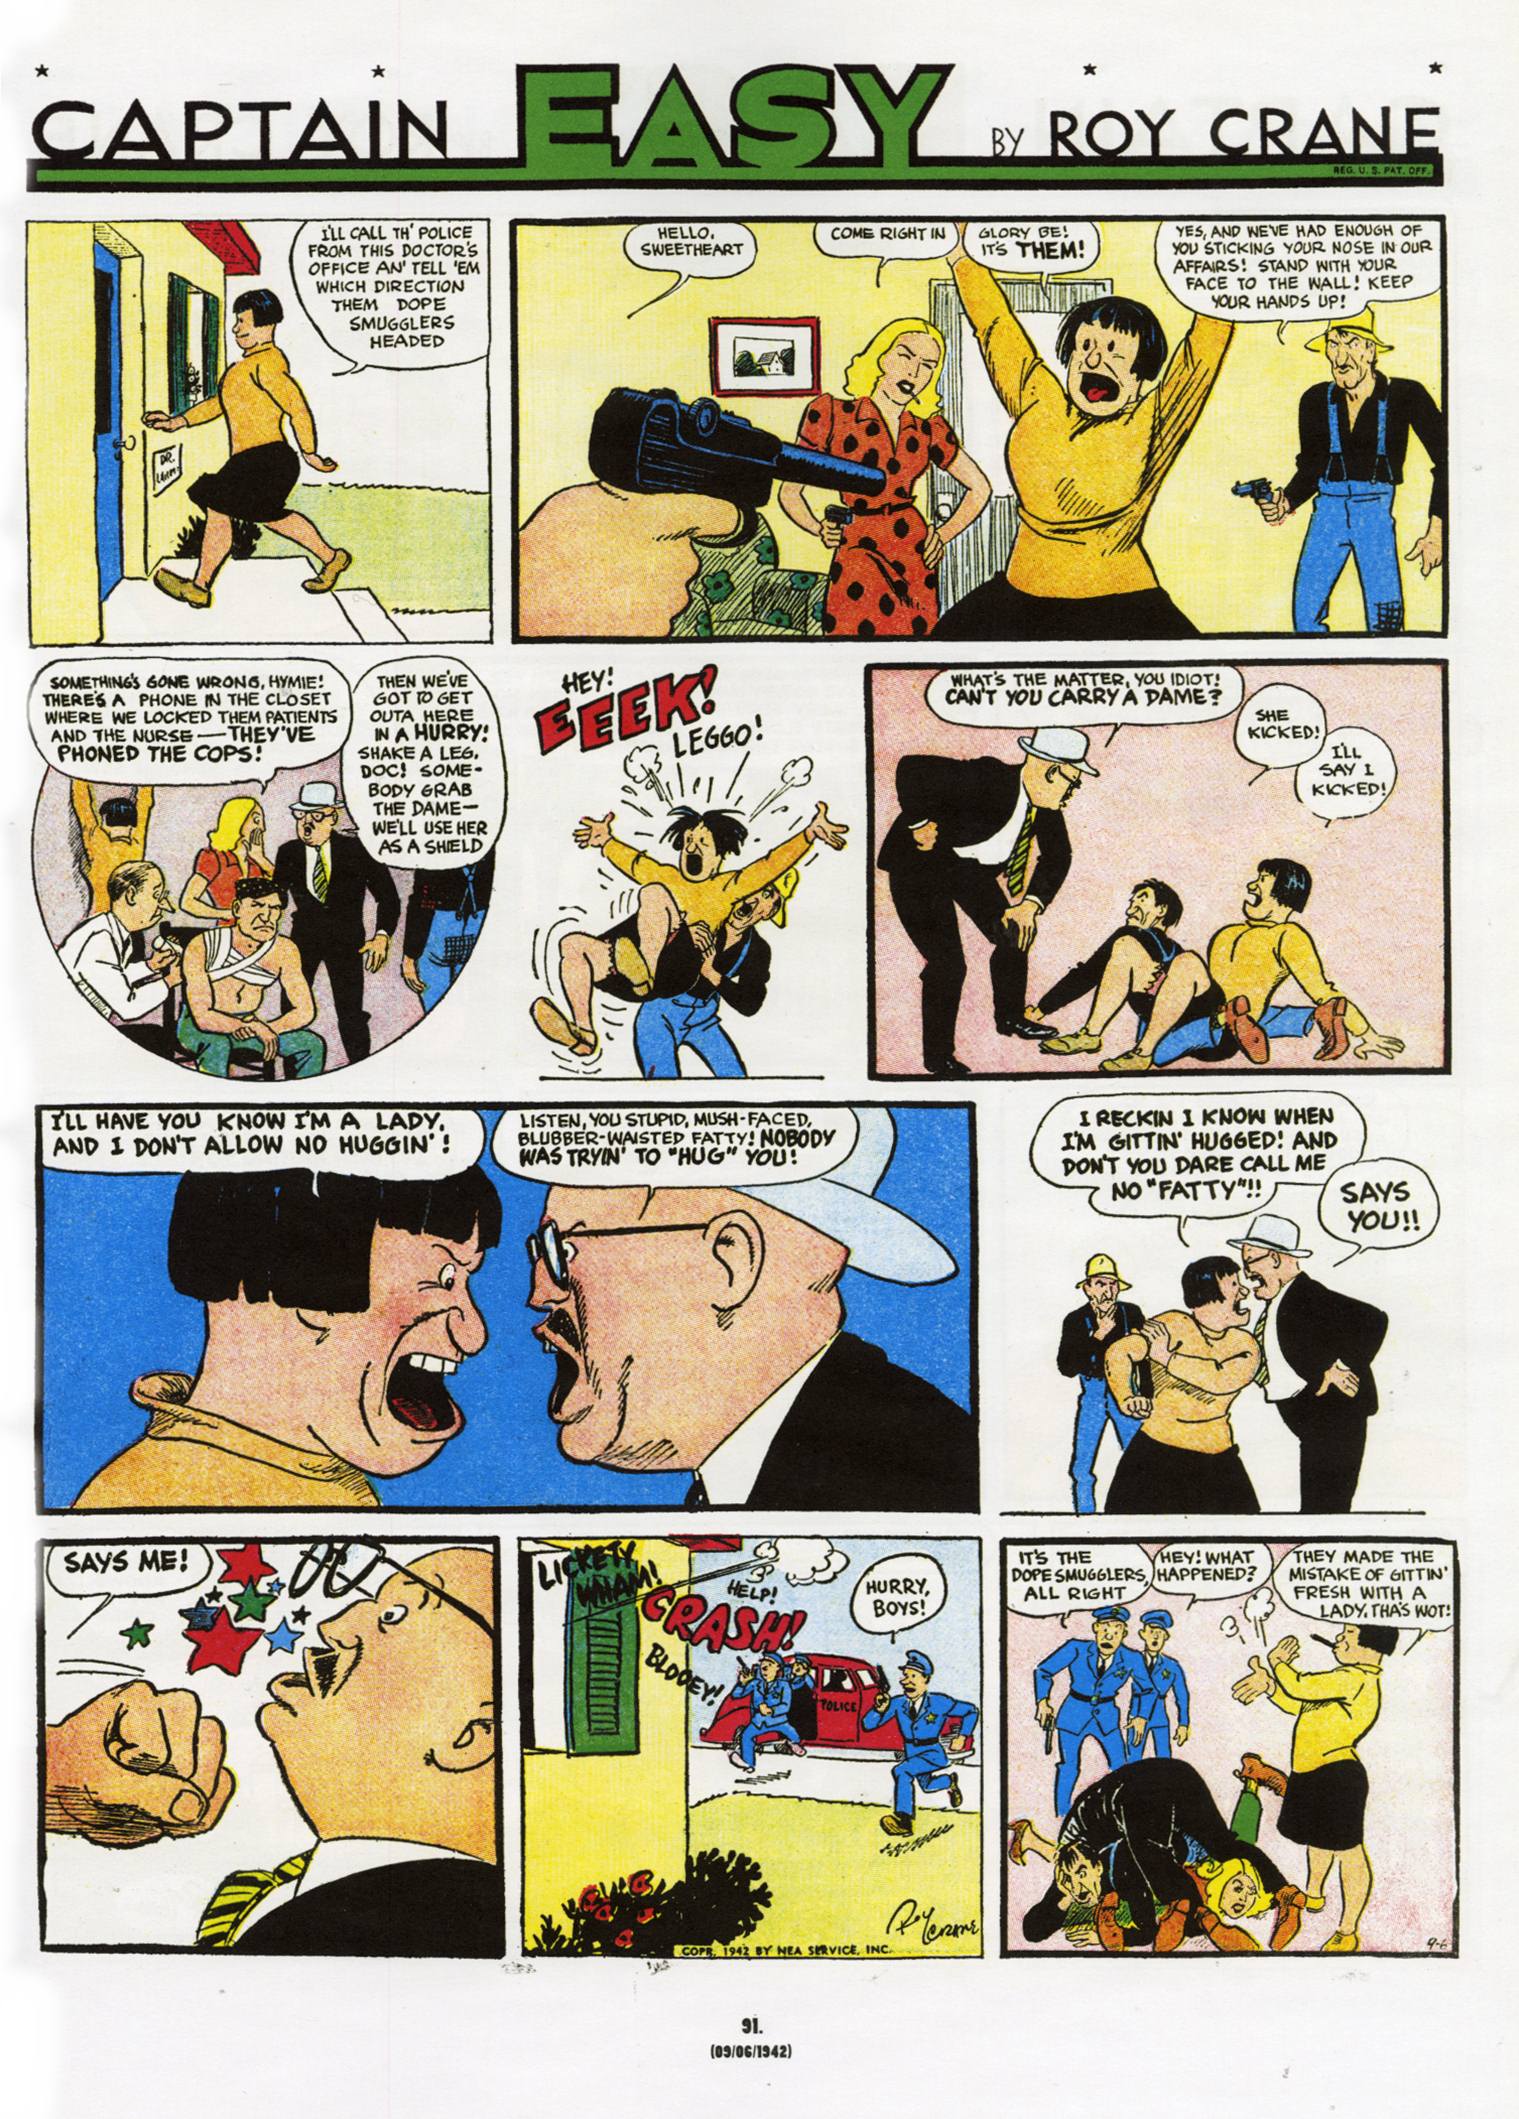 Captain Easy The Complete Sunday Newspaper strips review